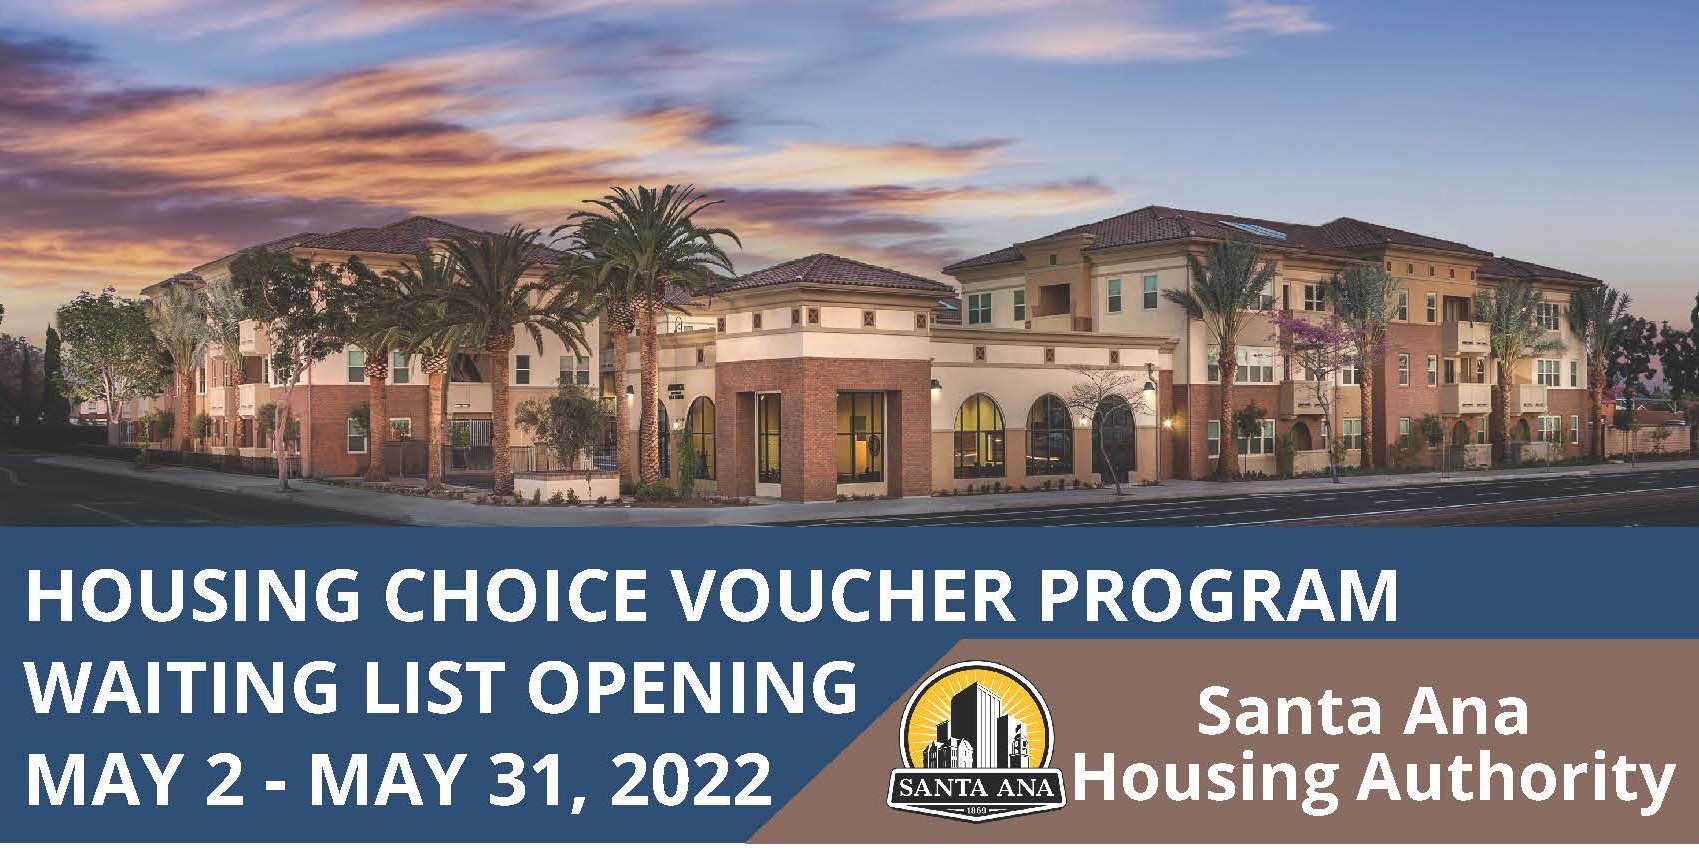 Housing choice voucher program waiting list opening May 2 - May 31 2022